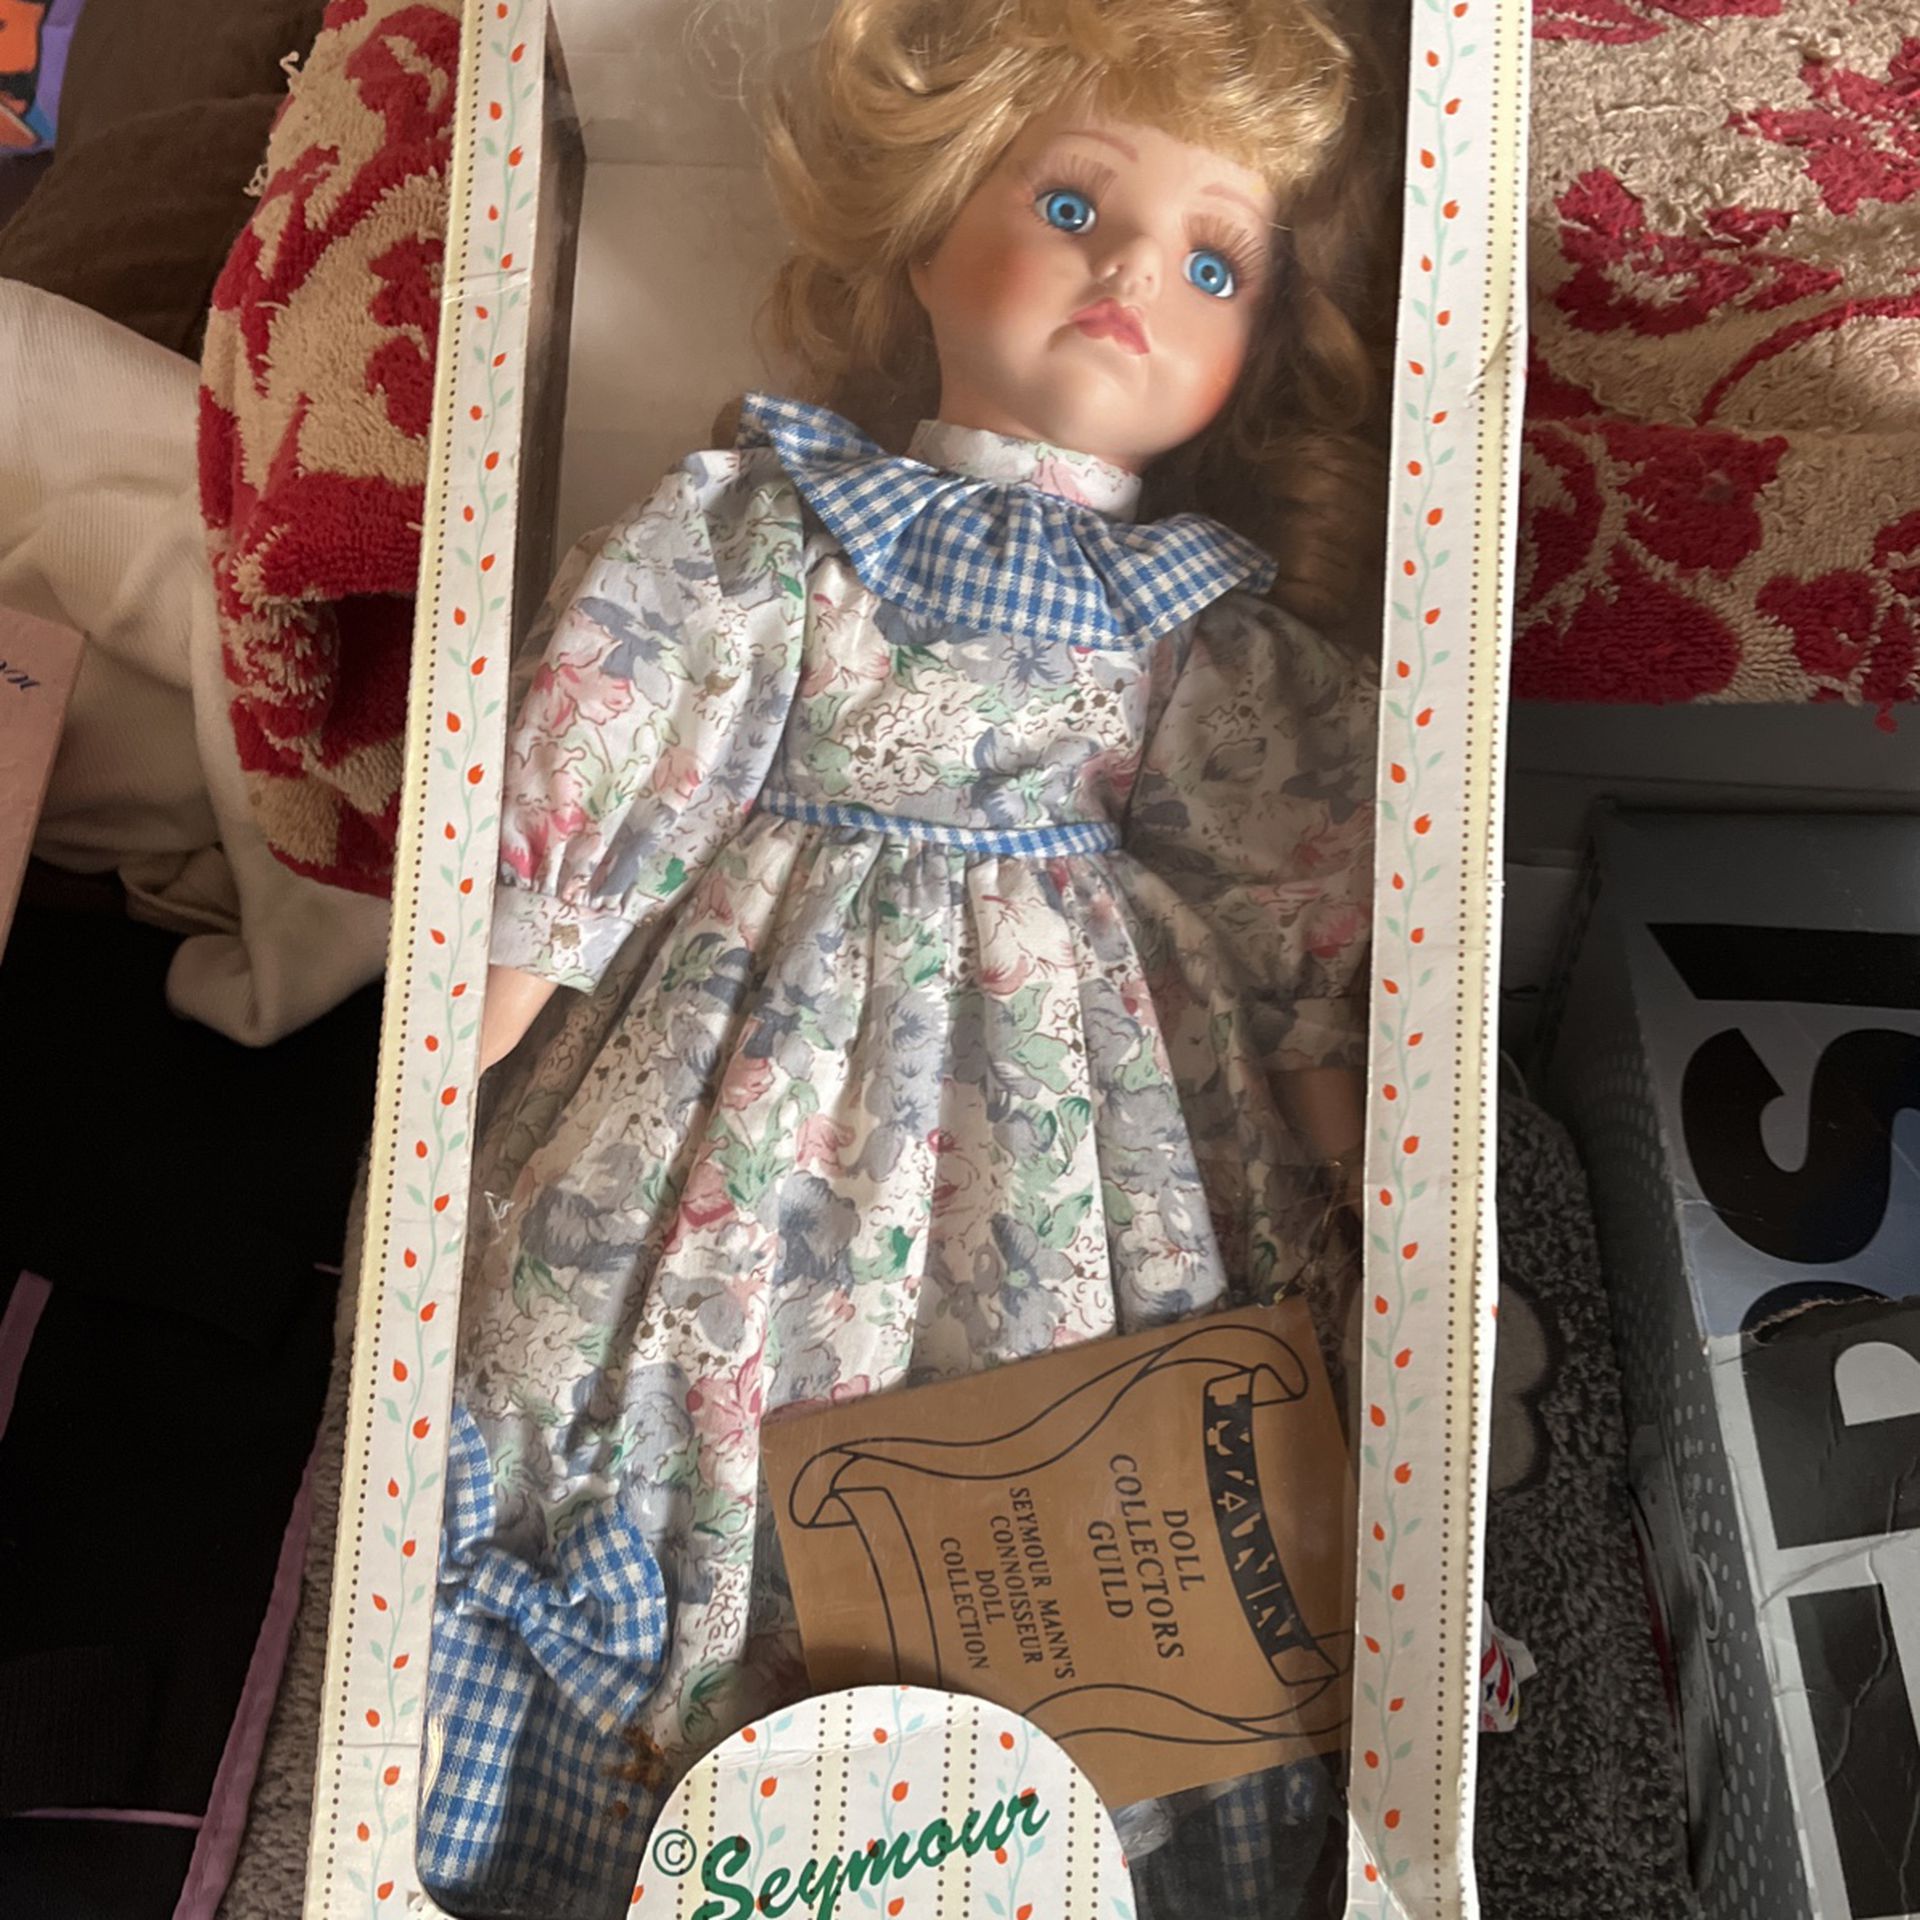 Porcelain Doll Collection $15